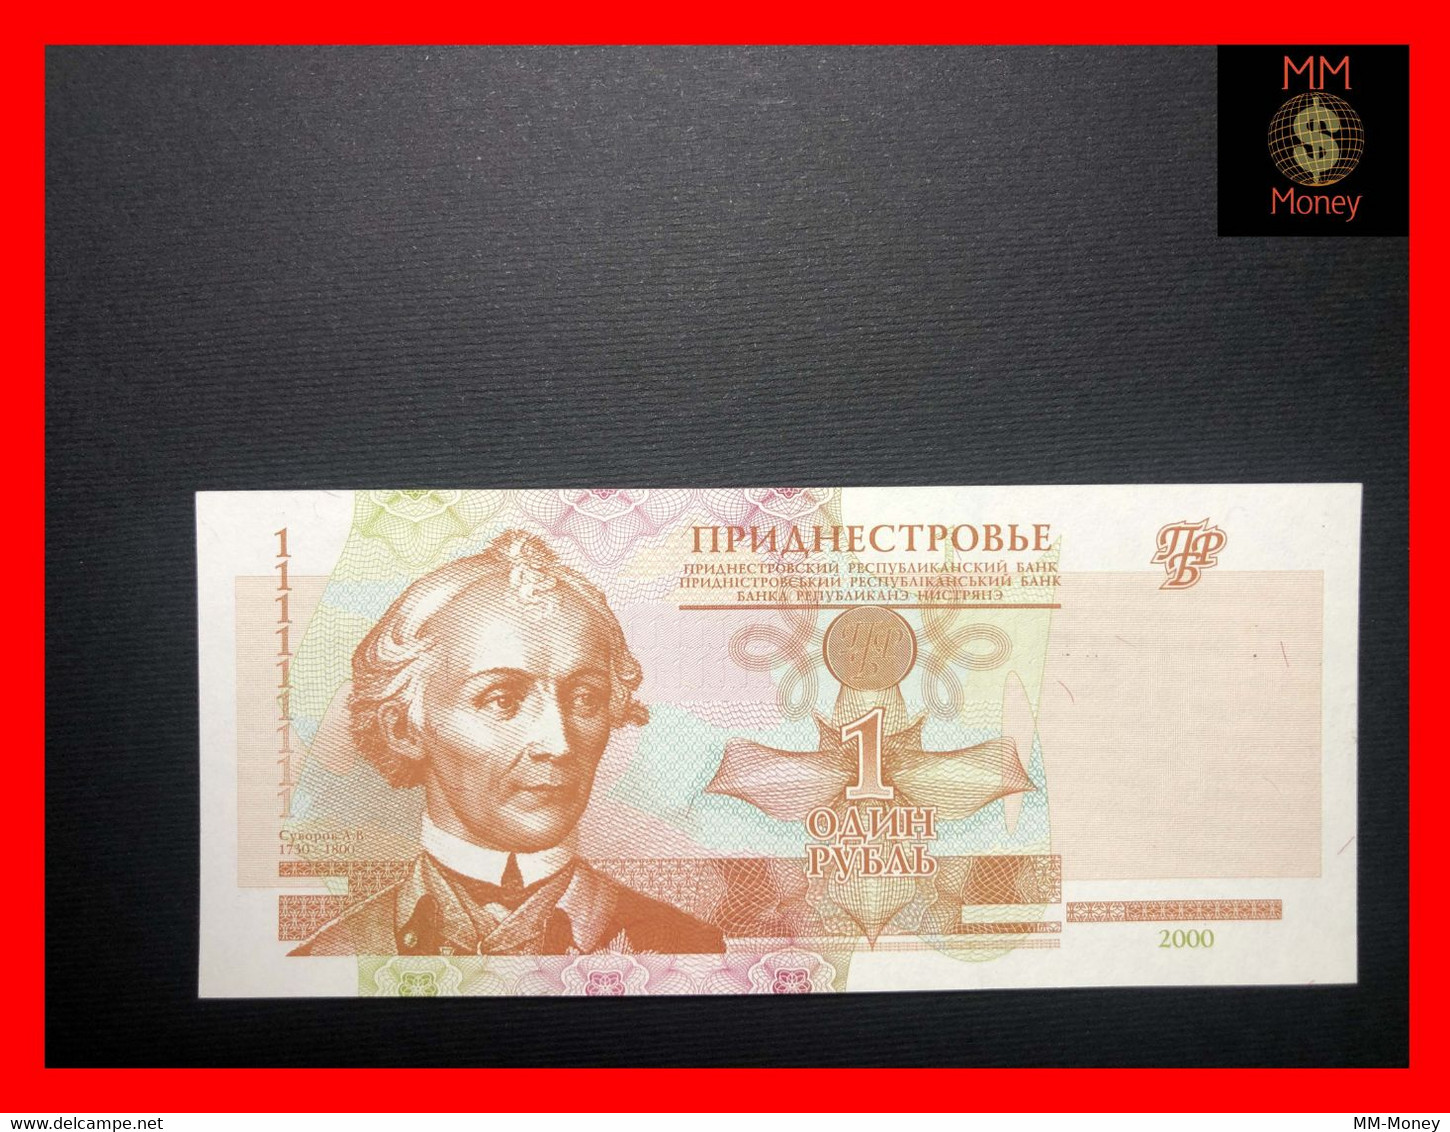 TRANSNISTRIA 1 Ruble  2000 P. 34  " Nice Serial  AB 2 111111 " UNC - Other - Europe